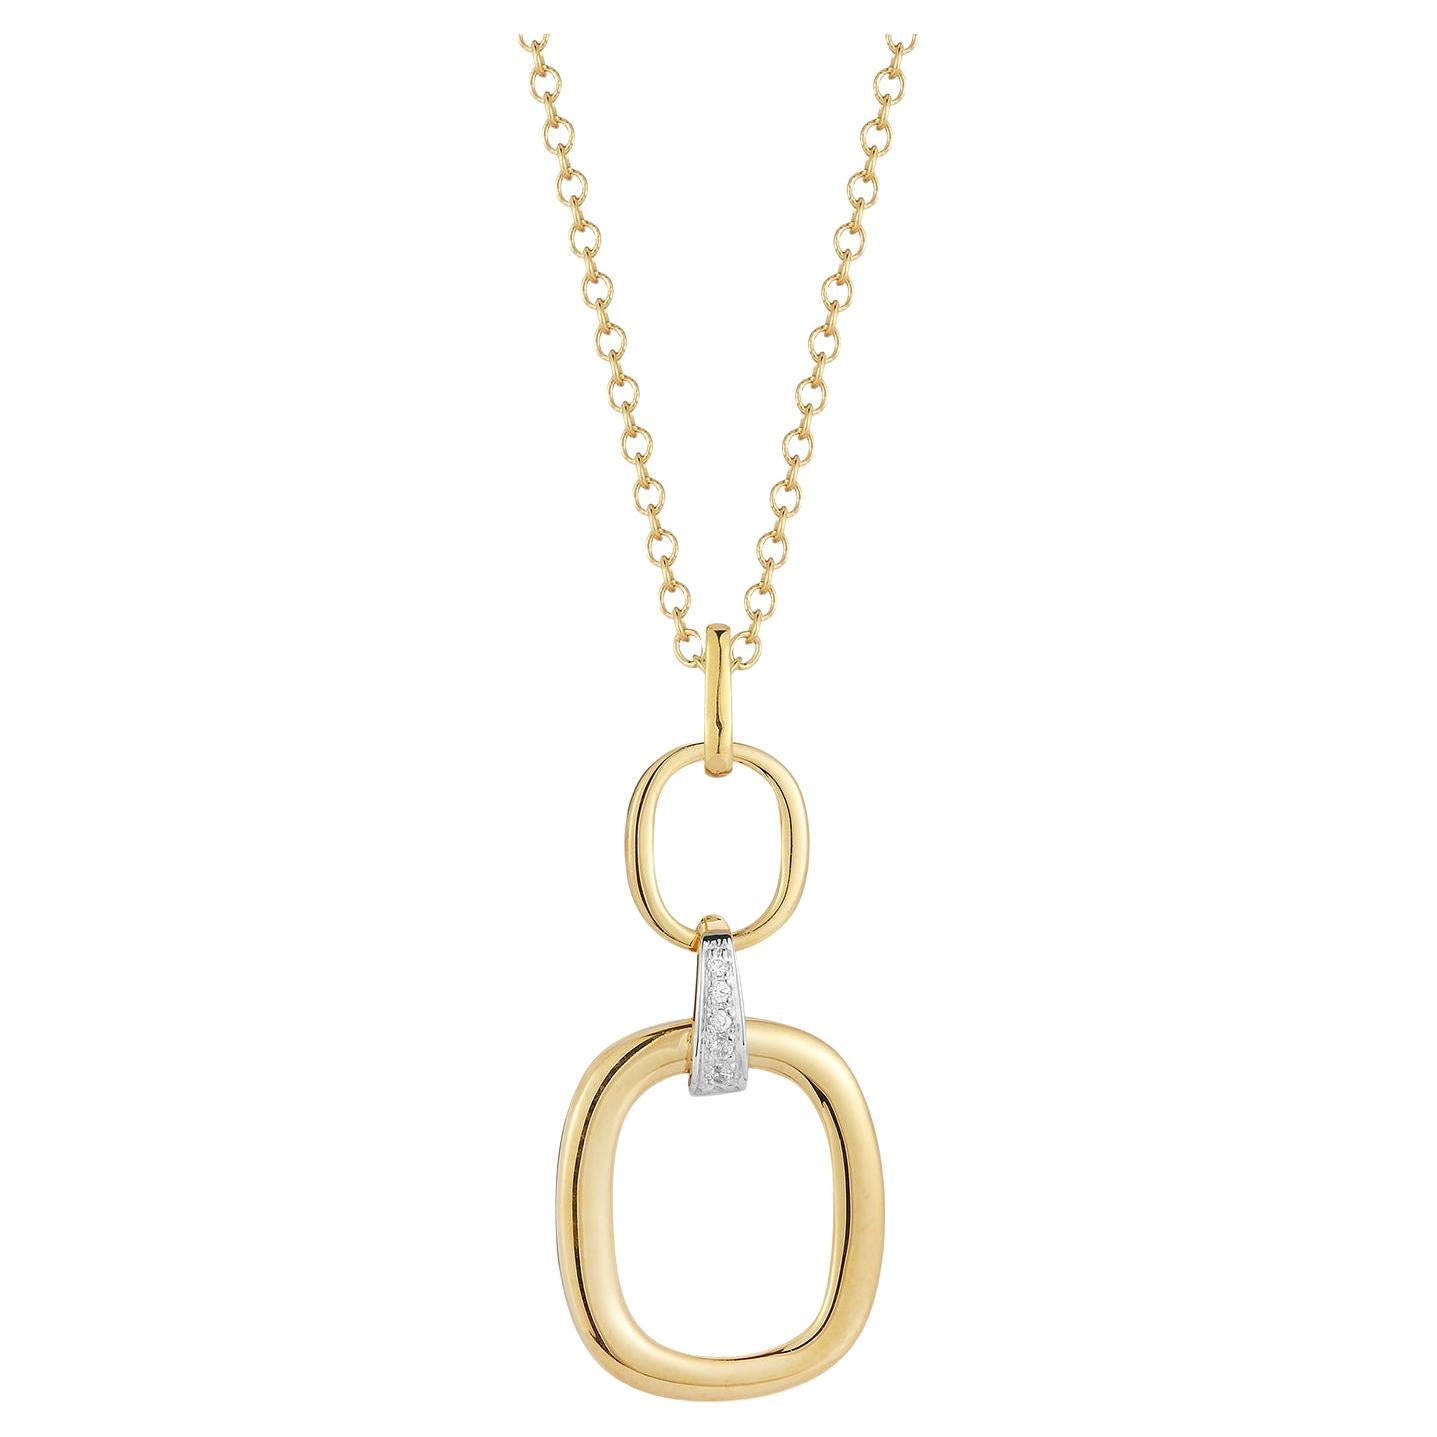 Hand-Crafted 14K Yellow Gold High Polish Graduating Open-Form Pendant